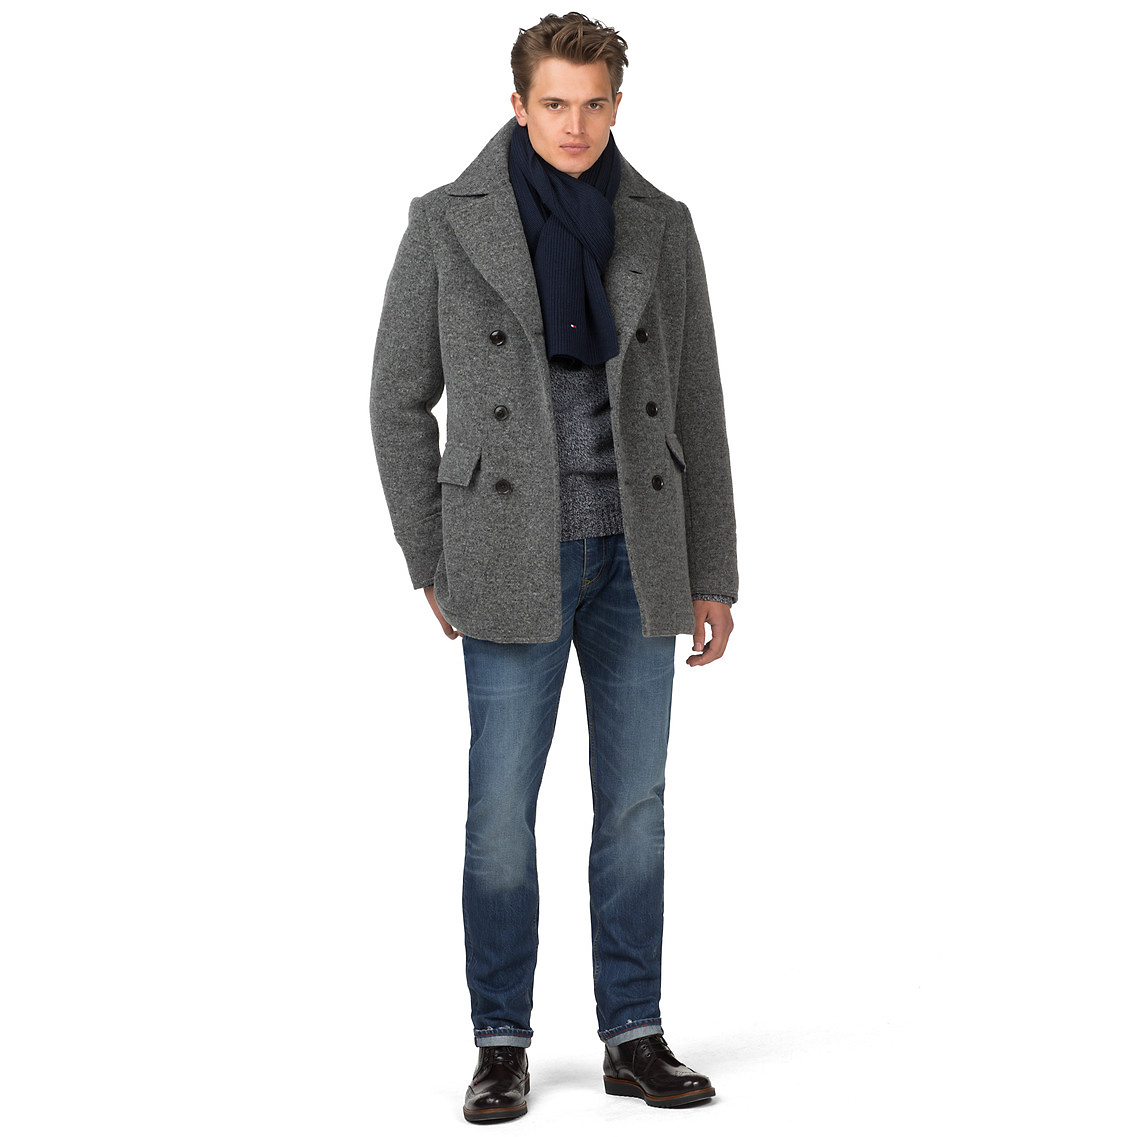 Tommy Hilfiger Knitted Pea Coat in Light Grey Heather (Grey) for Men - Lyst